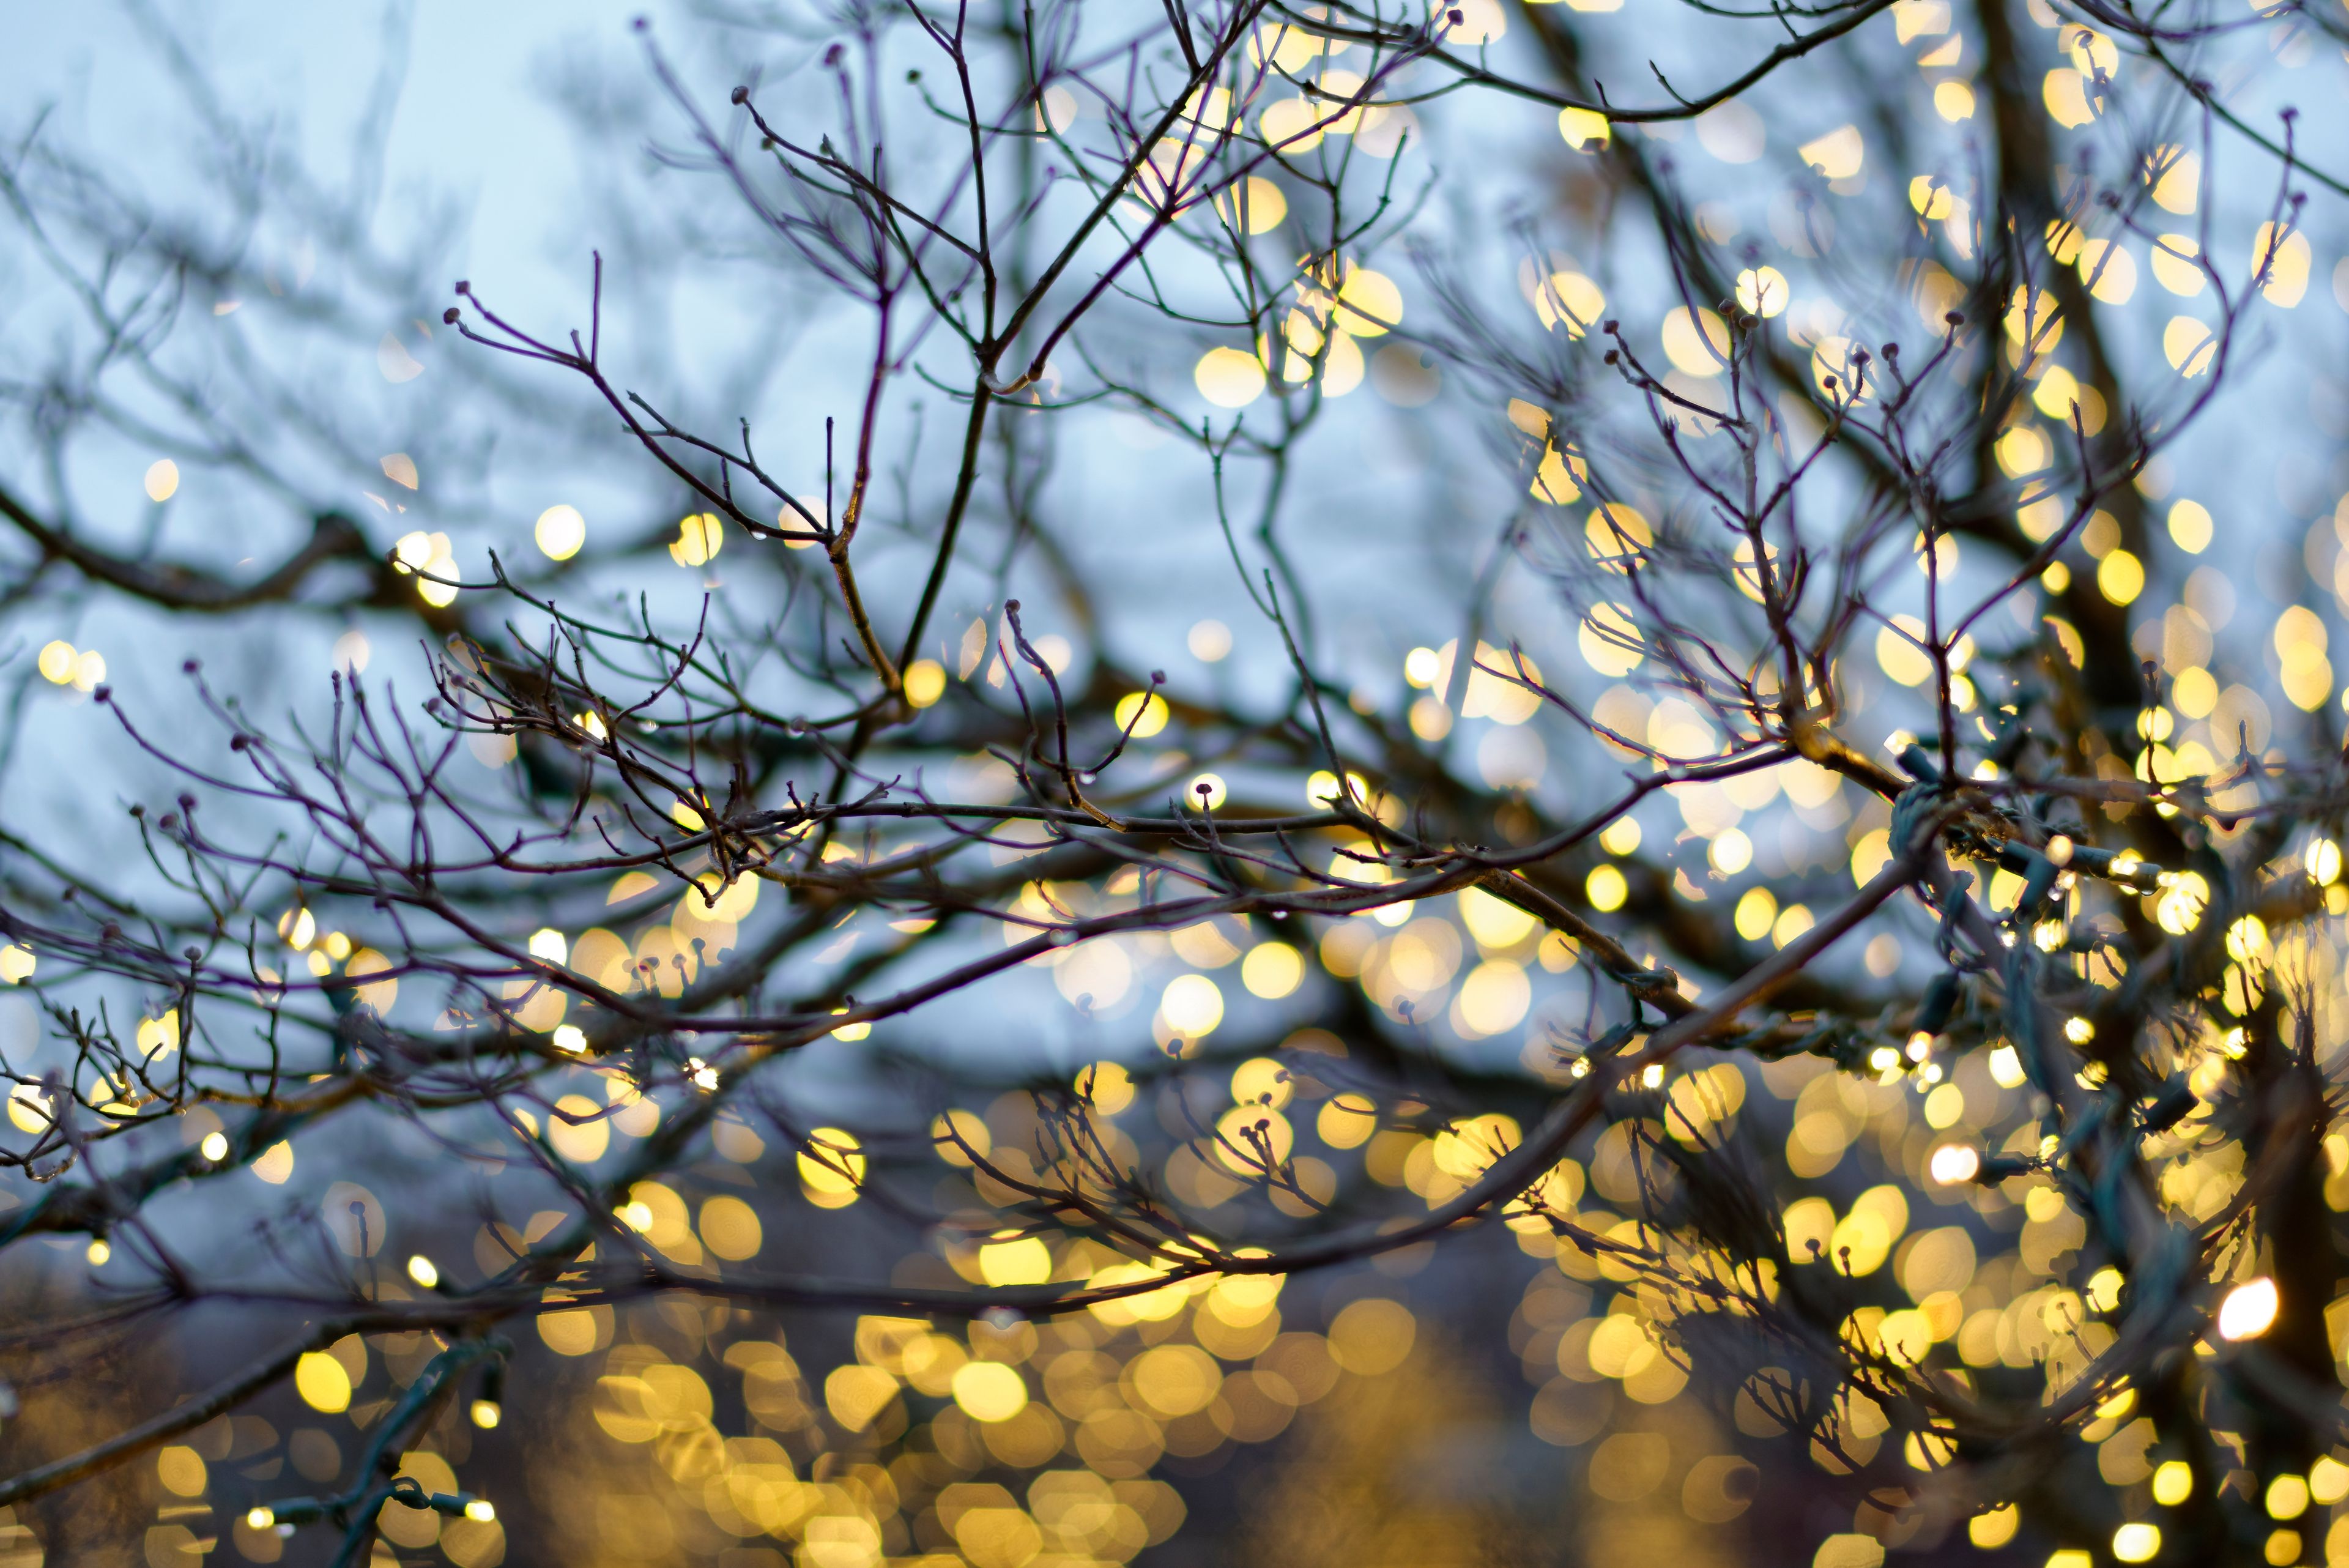 Yellow Christmas lights on tree branches.